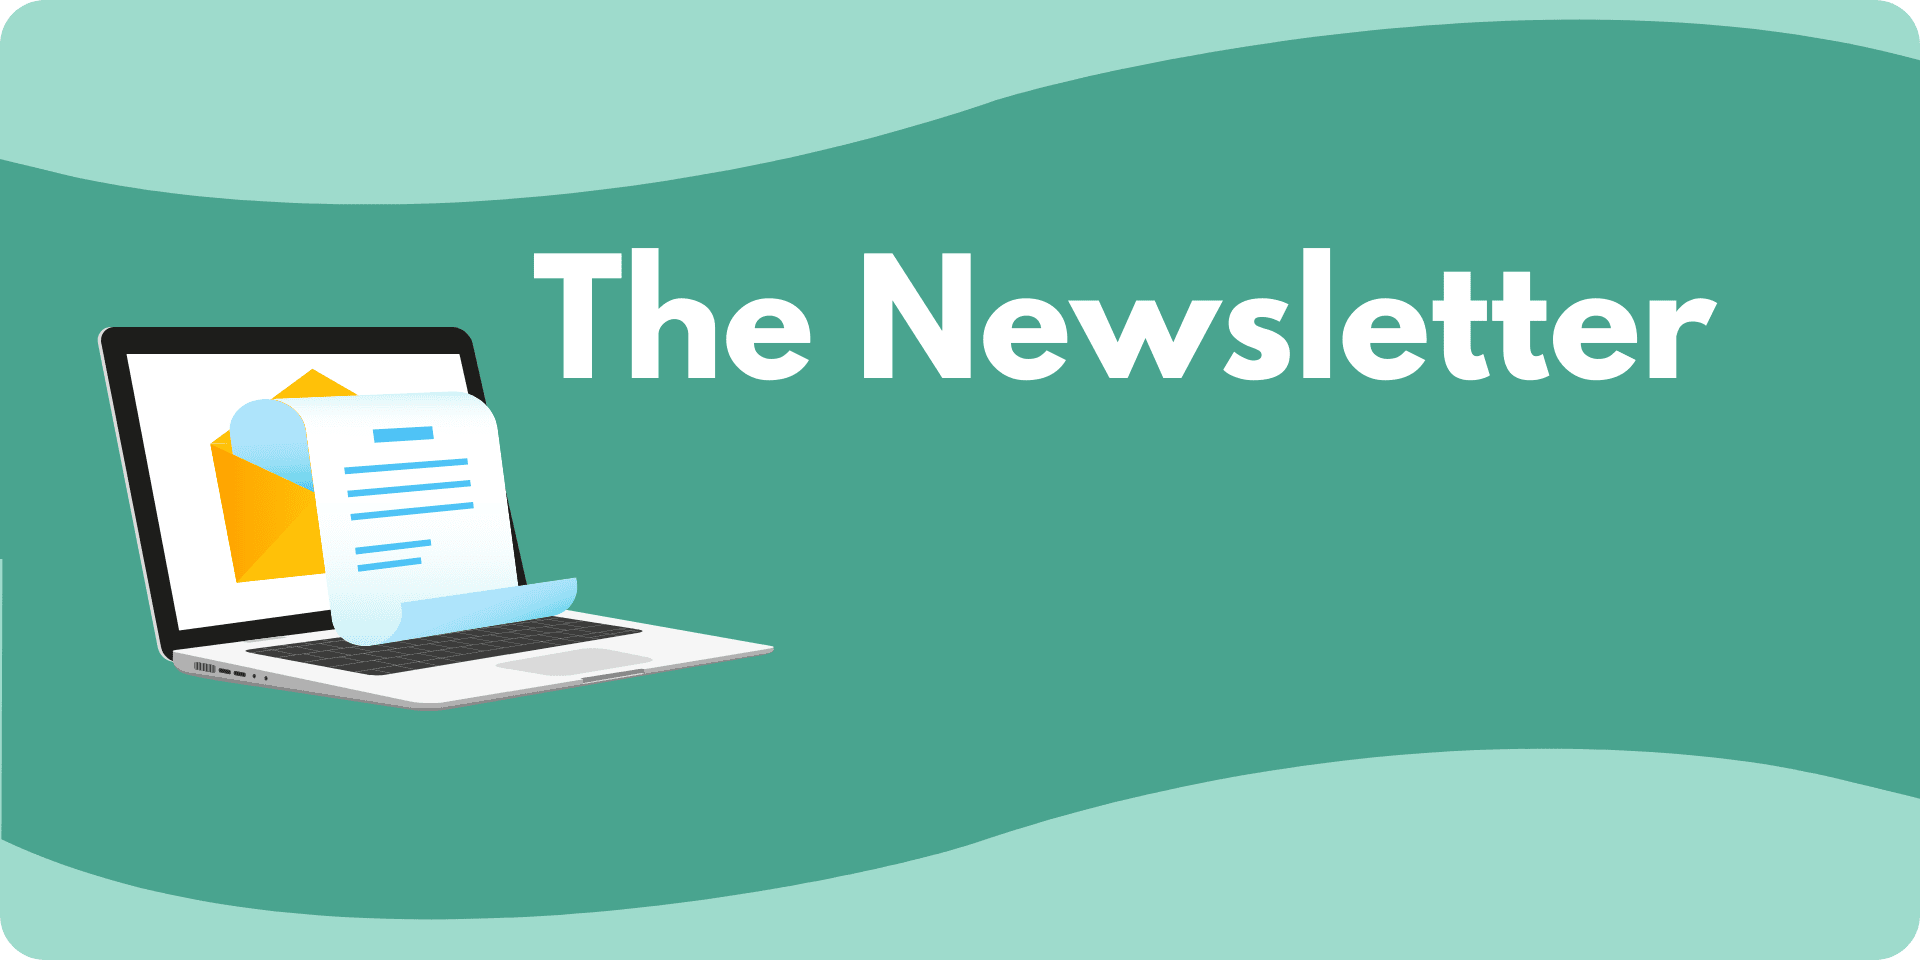 A graphic of a computer with a document, representing a newsletter, next to the title "Newsletter"